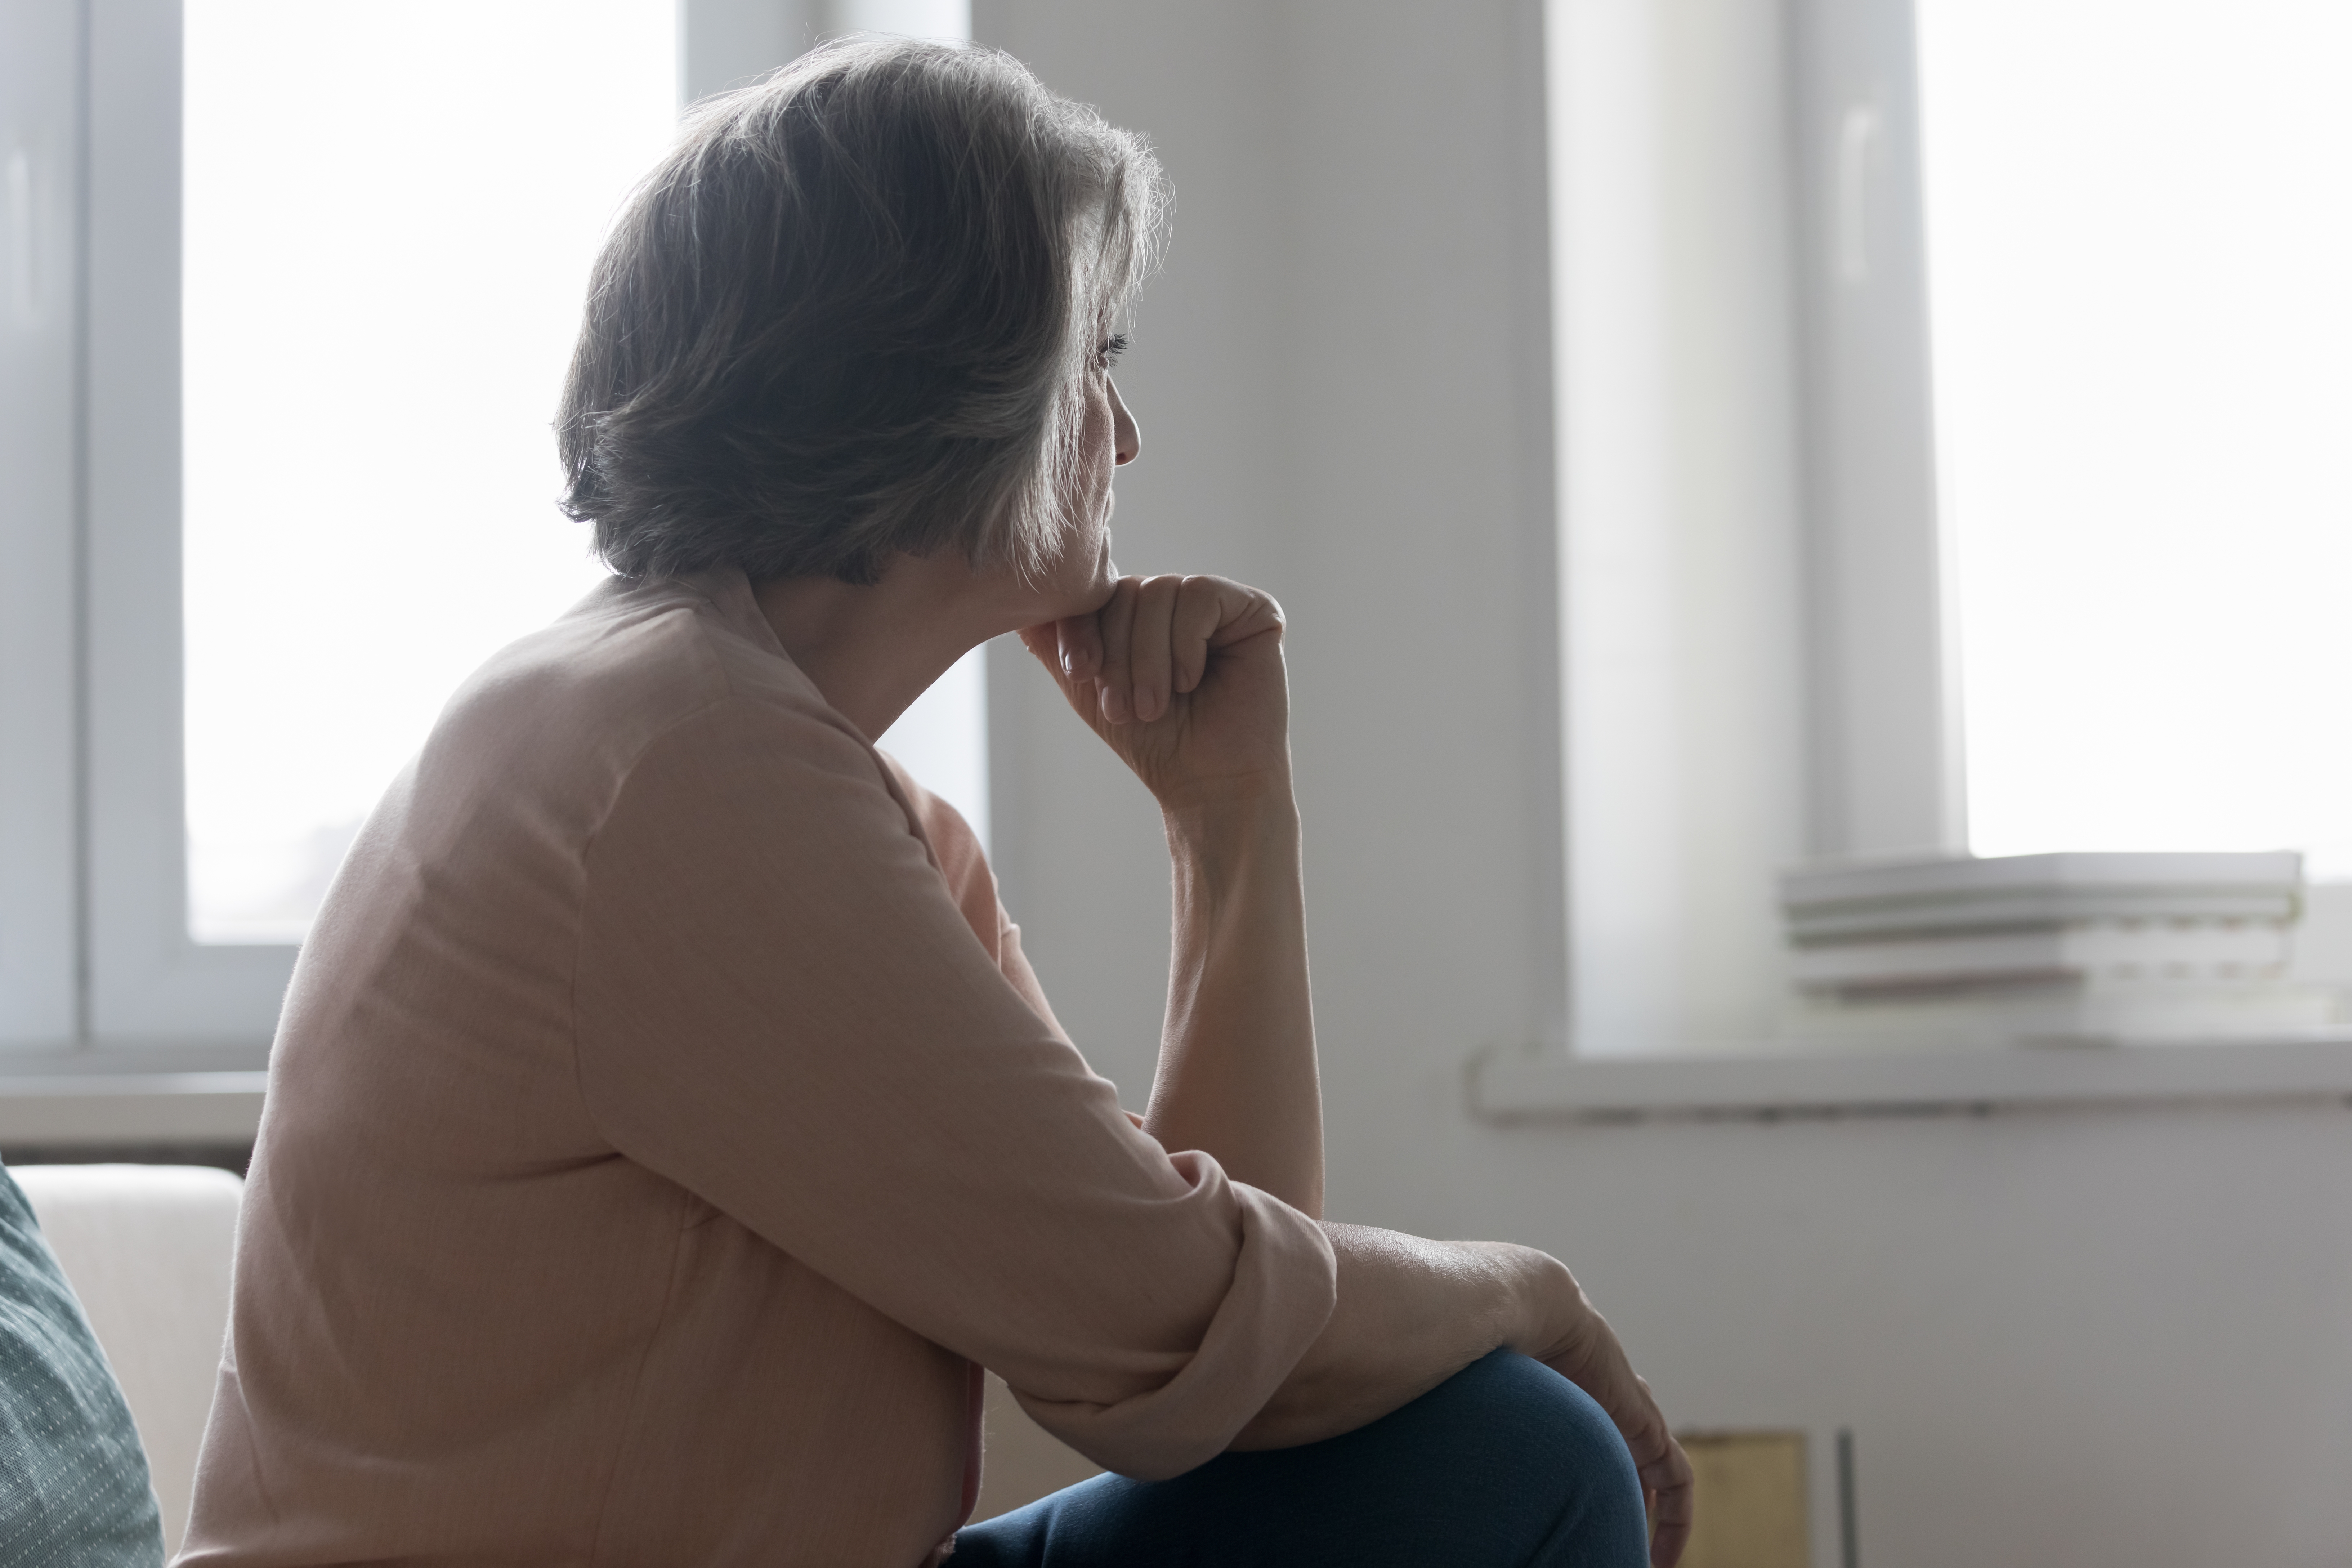 An older woman sitting on a bed and looking outside thoughtfully | Source: Shutterstock